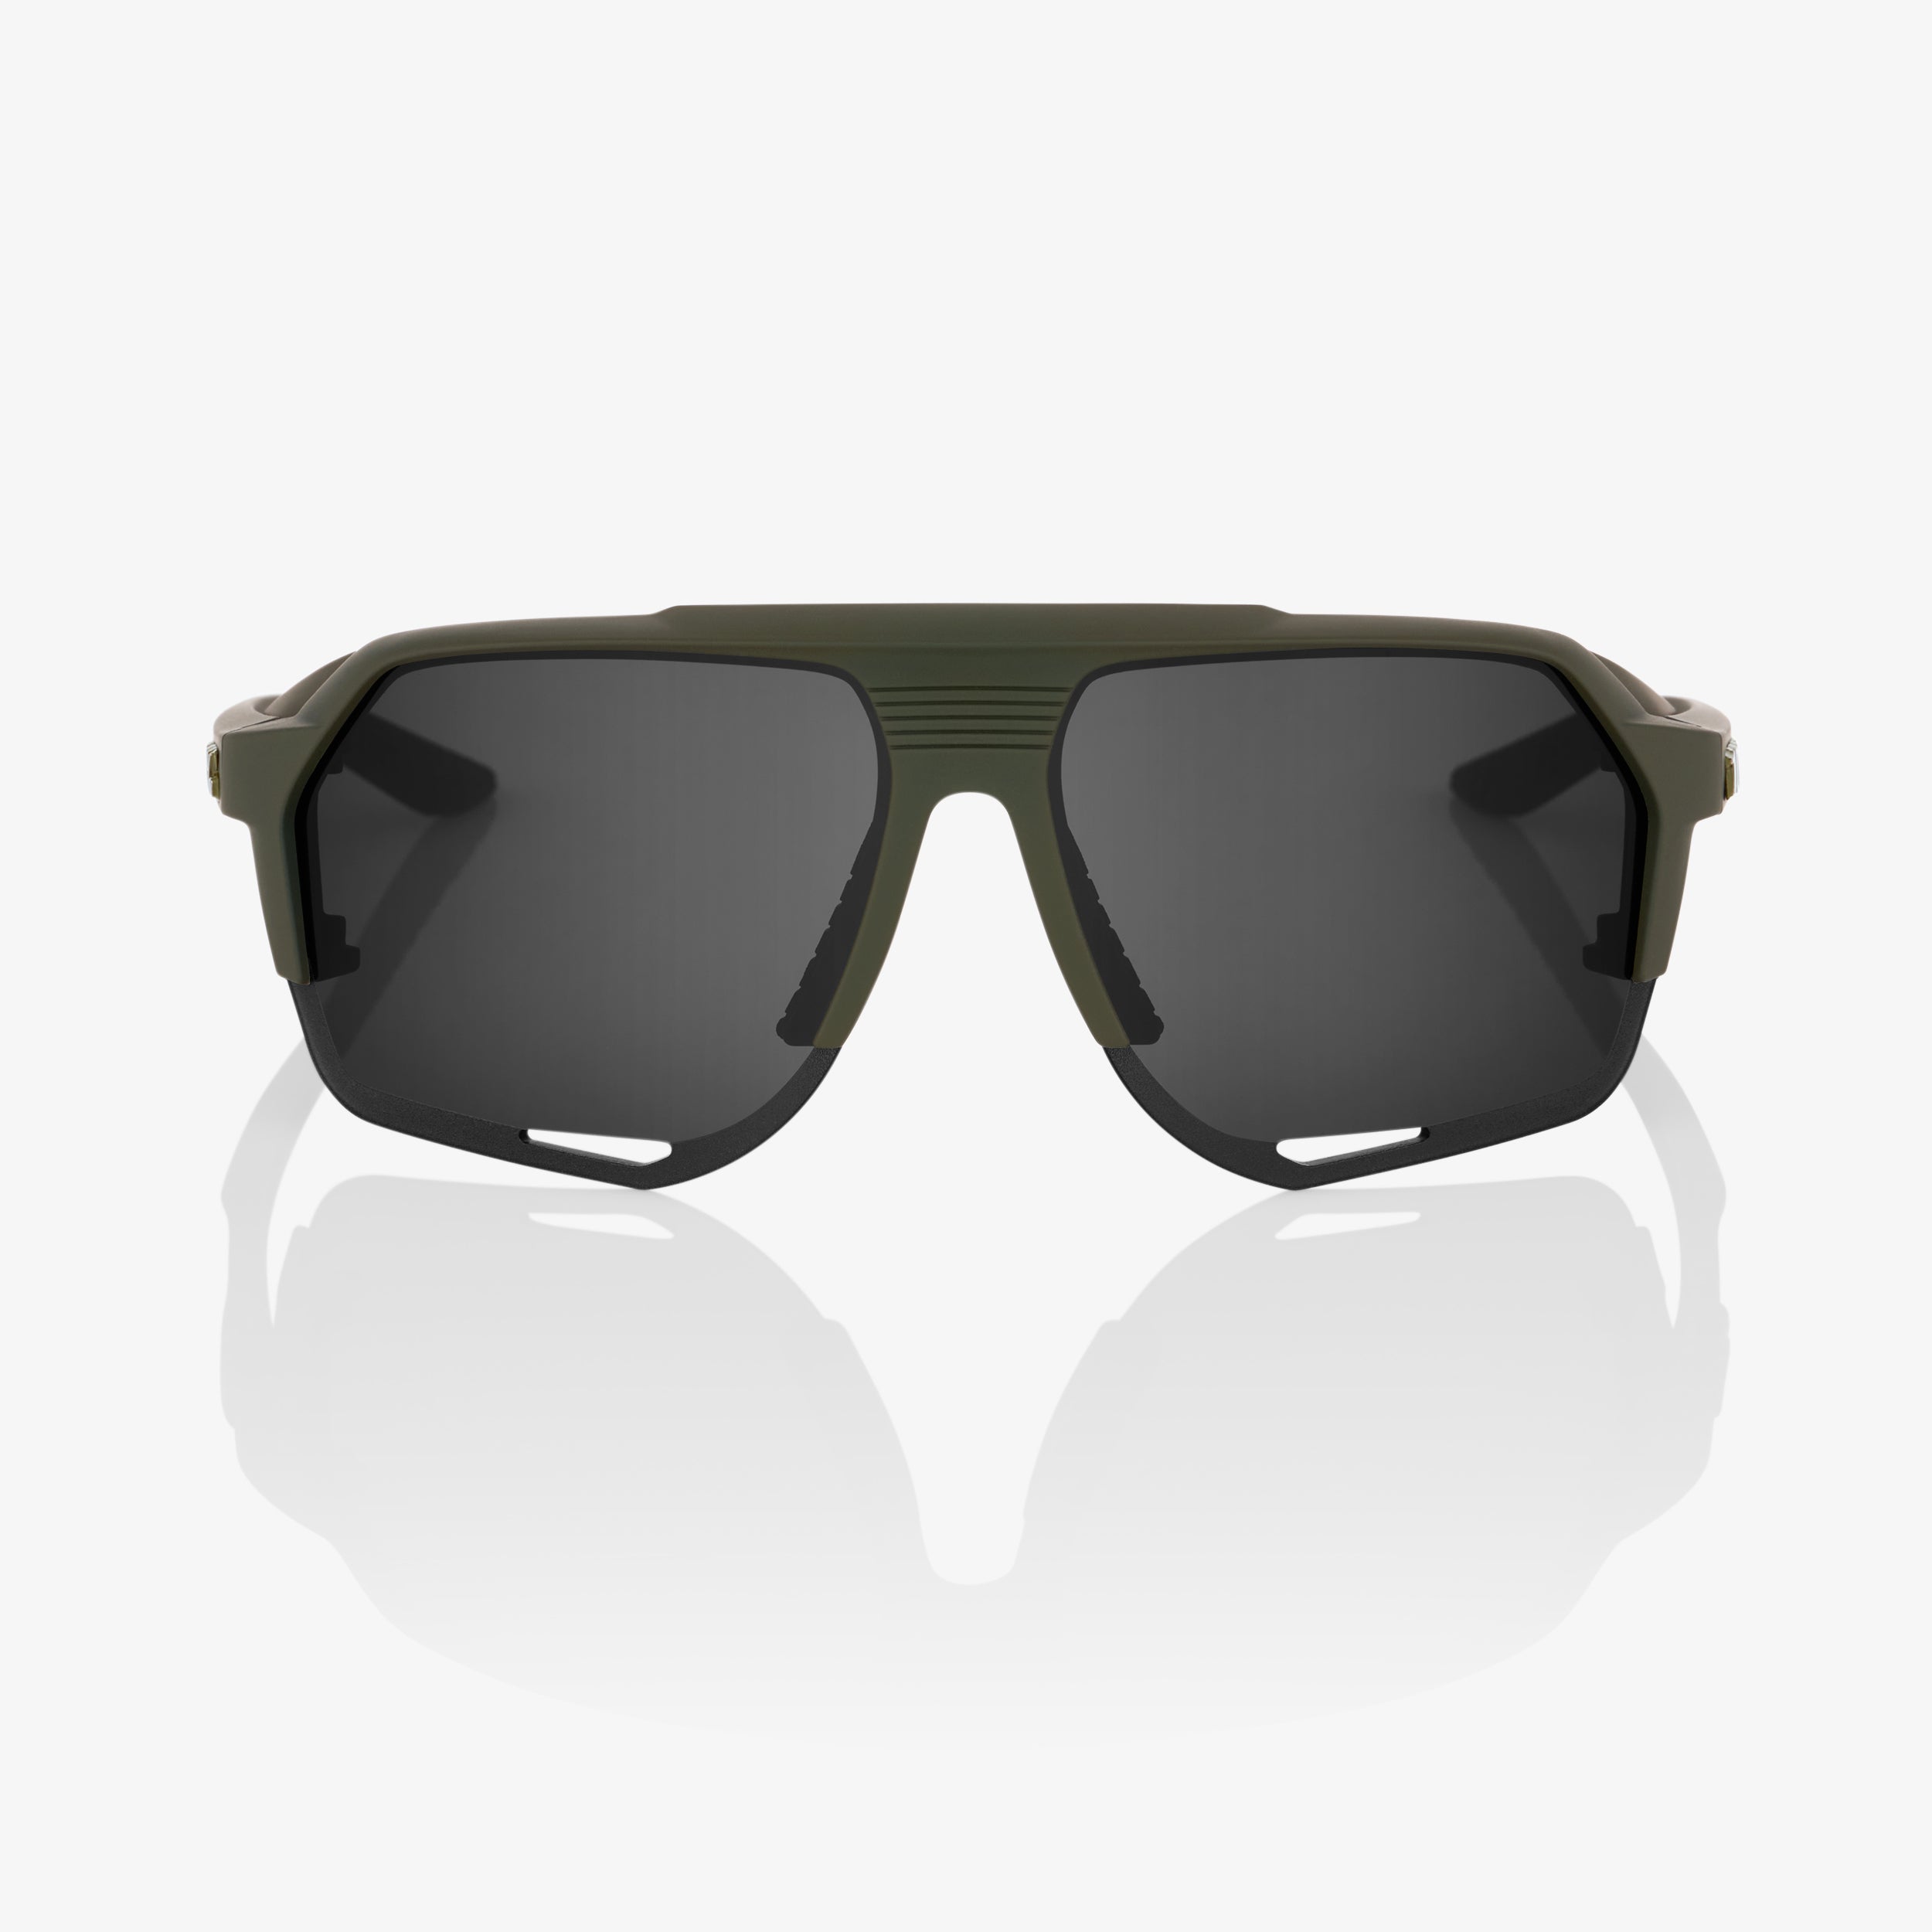 NORVIK™ - Soft Tact Army Green - Smoke Lens - Secondary